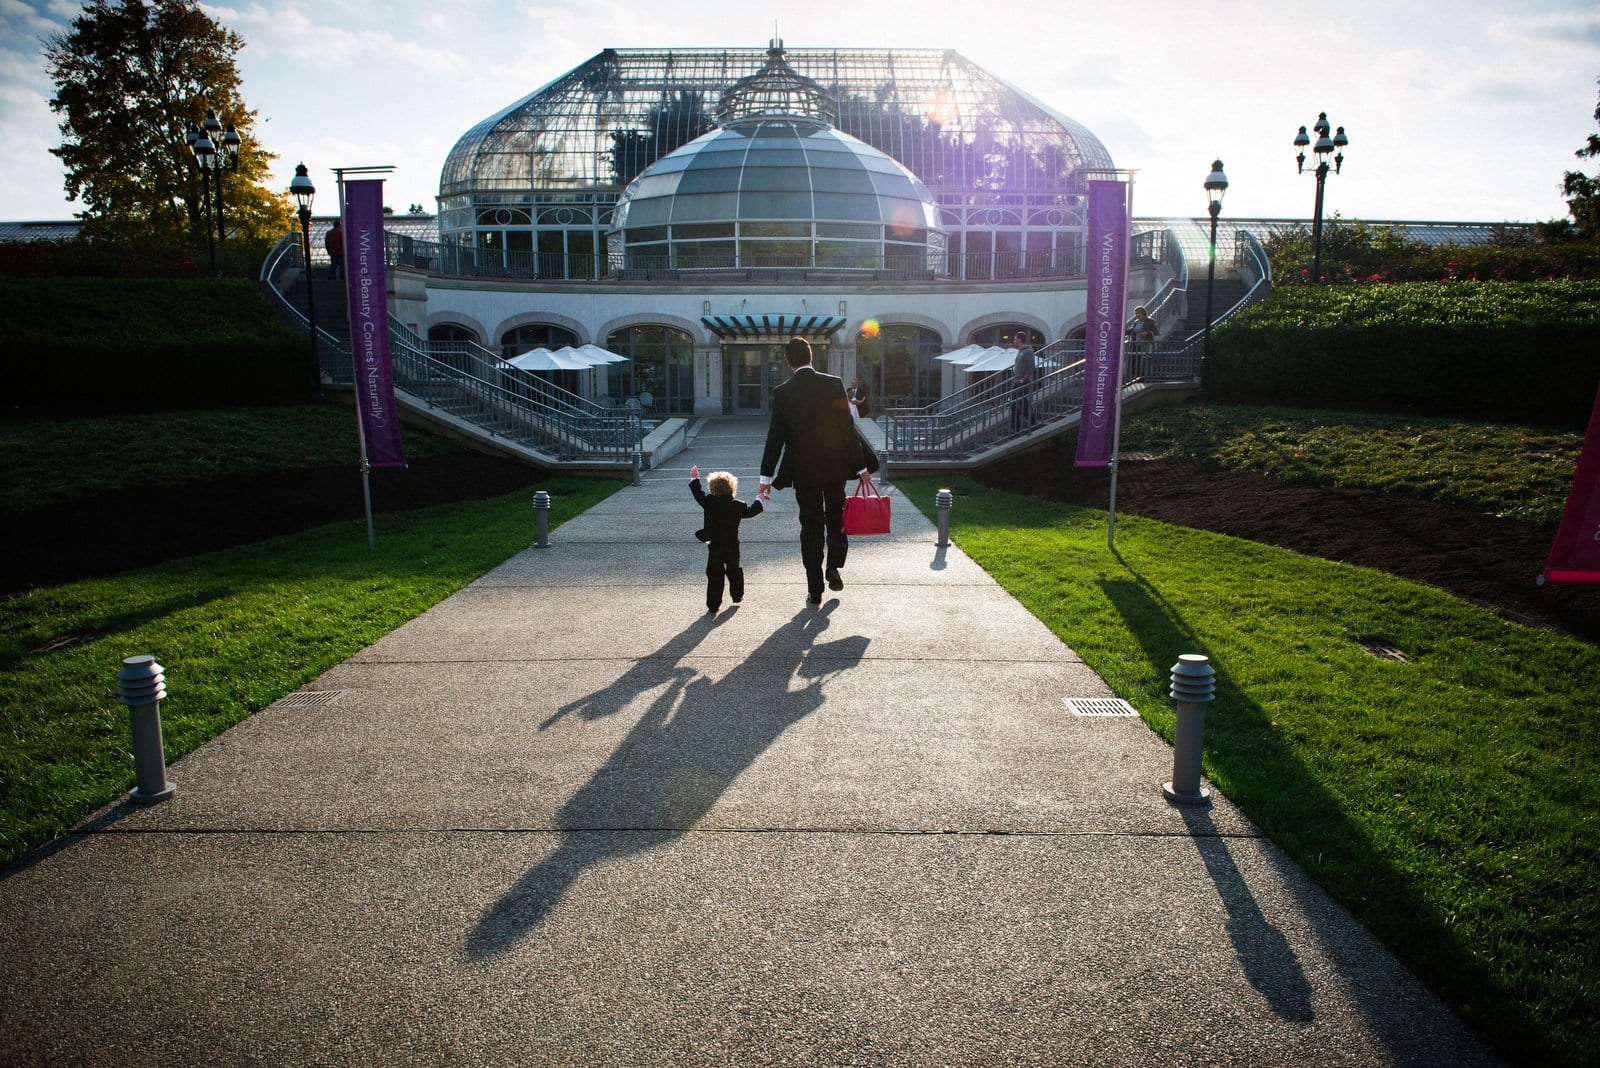 A groom carrying a red bag holds the hand of a small boy as they walk to Phipps Conservatory before his wedding. The setting sun casts long shadows on the path behind them.